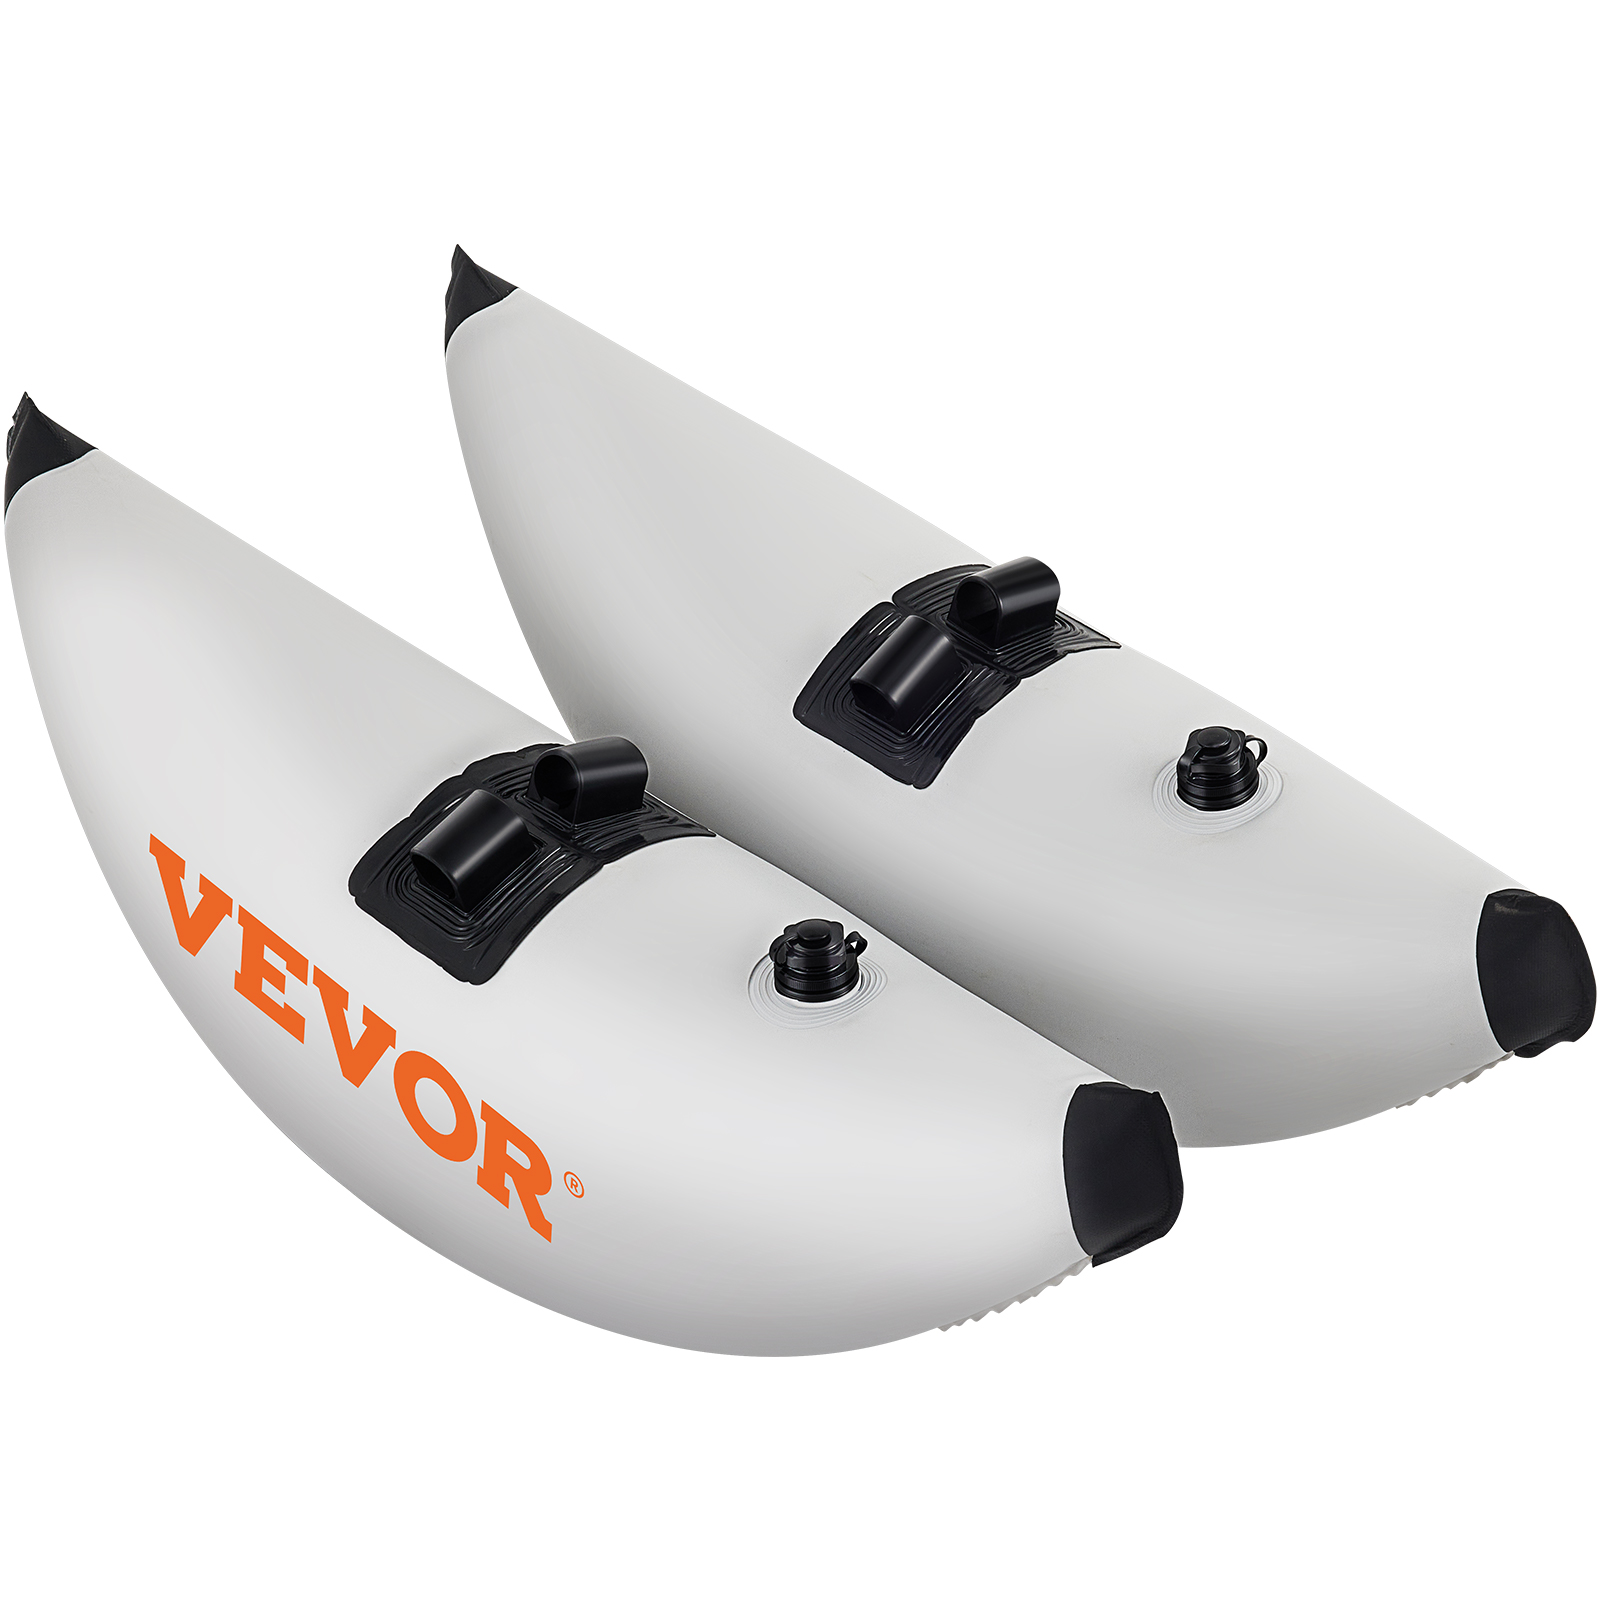 VEVOR Kayak Outrigger Stabilizer 2 Pcs Pvc Inflatable Outrigger Float with Sidekick Arms Rod Standing Float Stabilizer System Kit for Kayaks Canoes